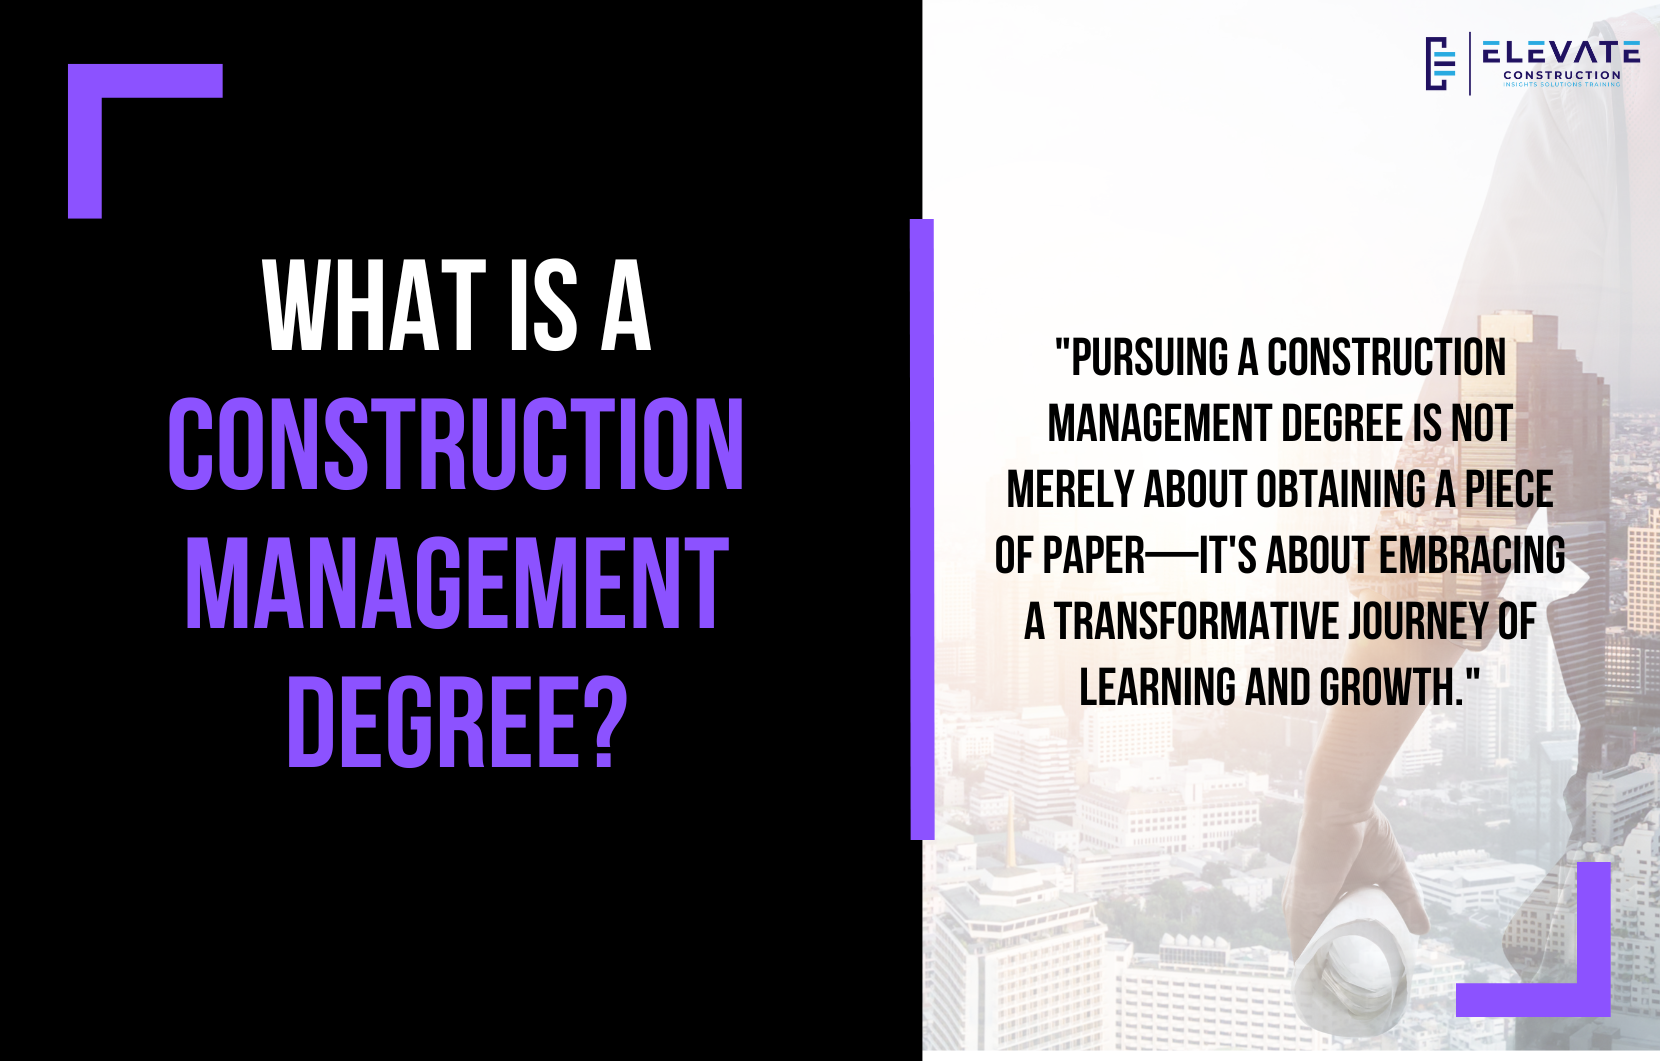 What is a Construction Management Degree?